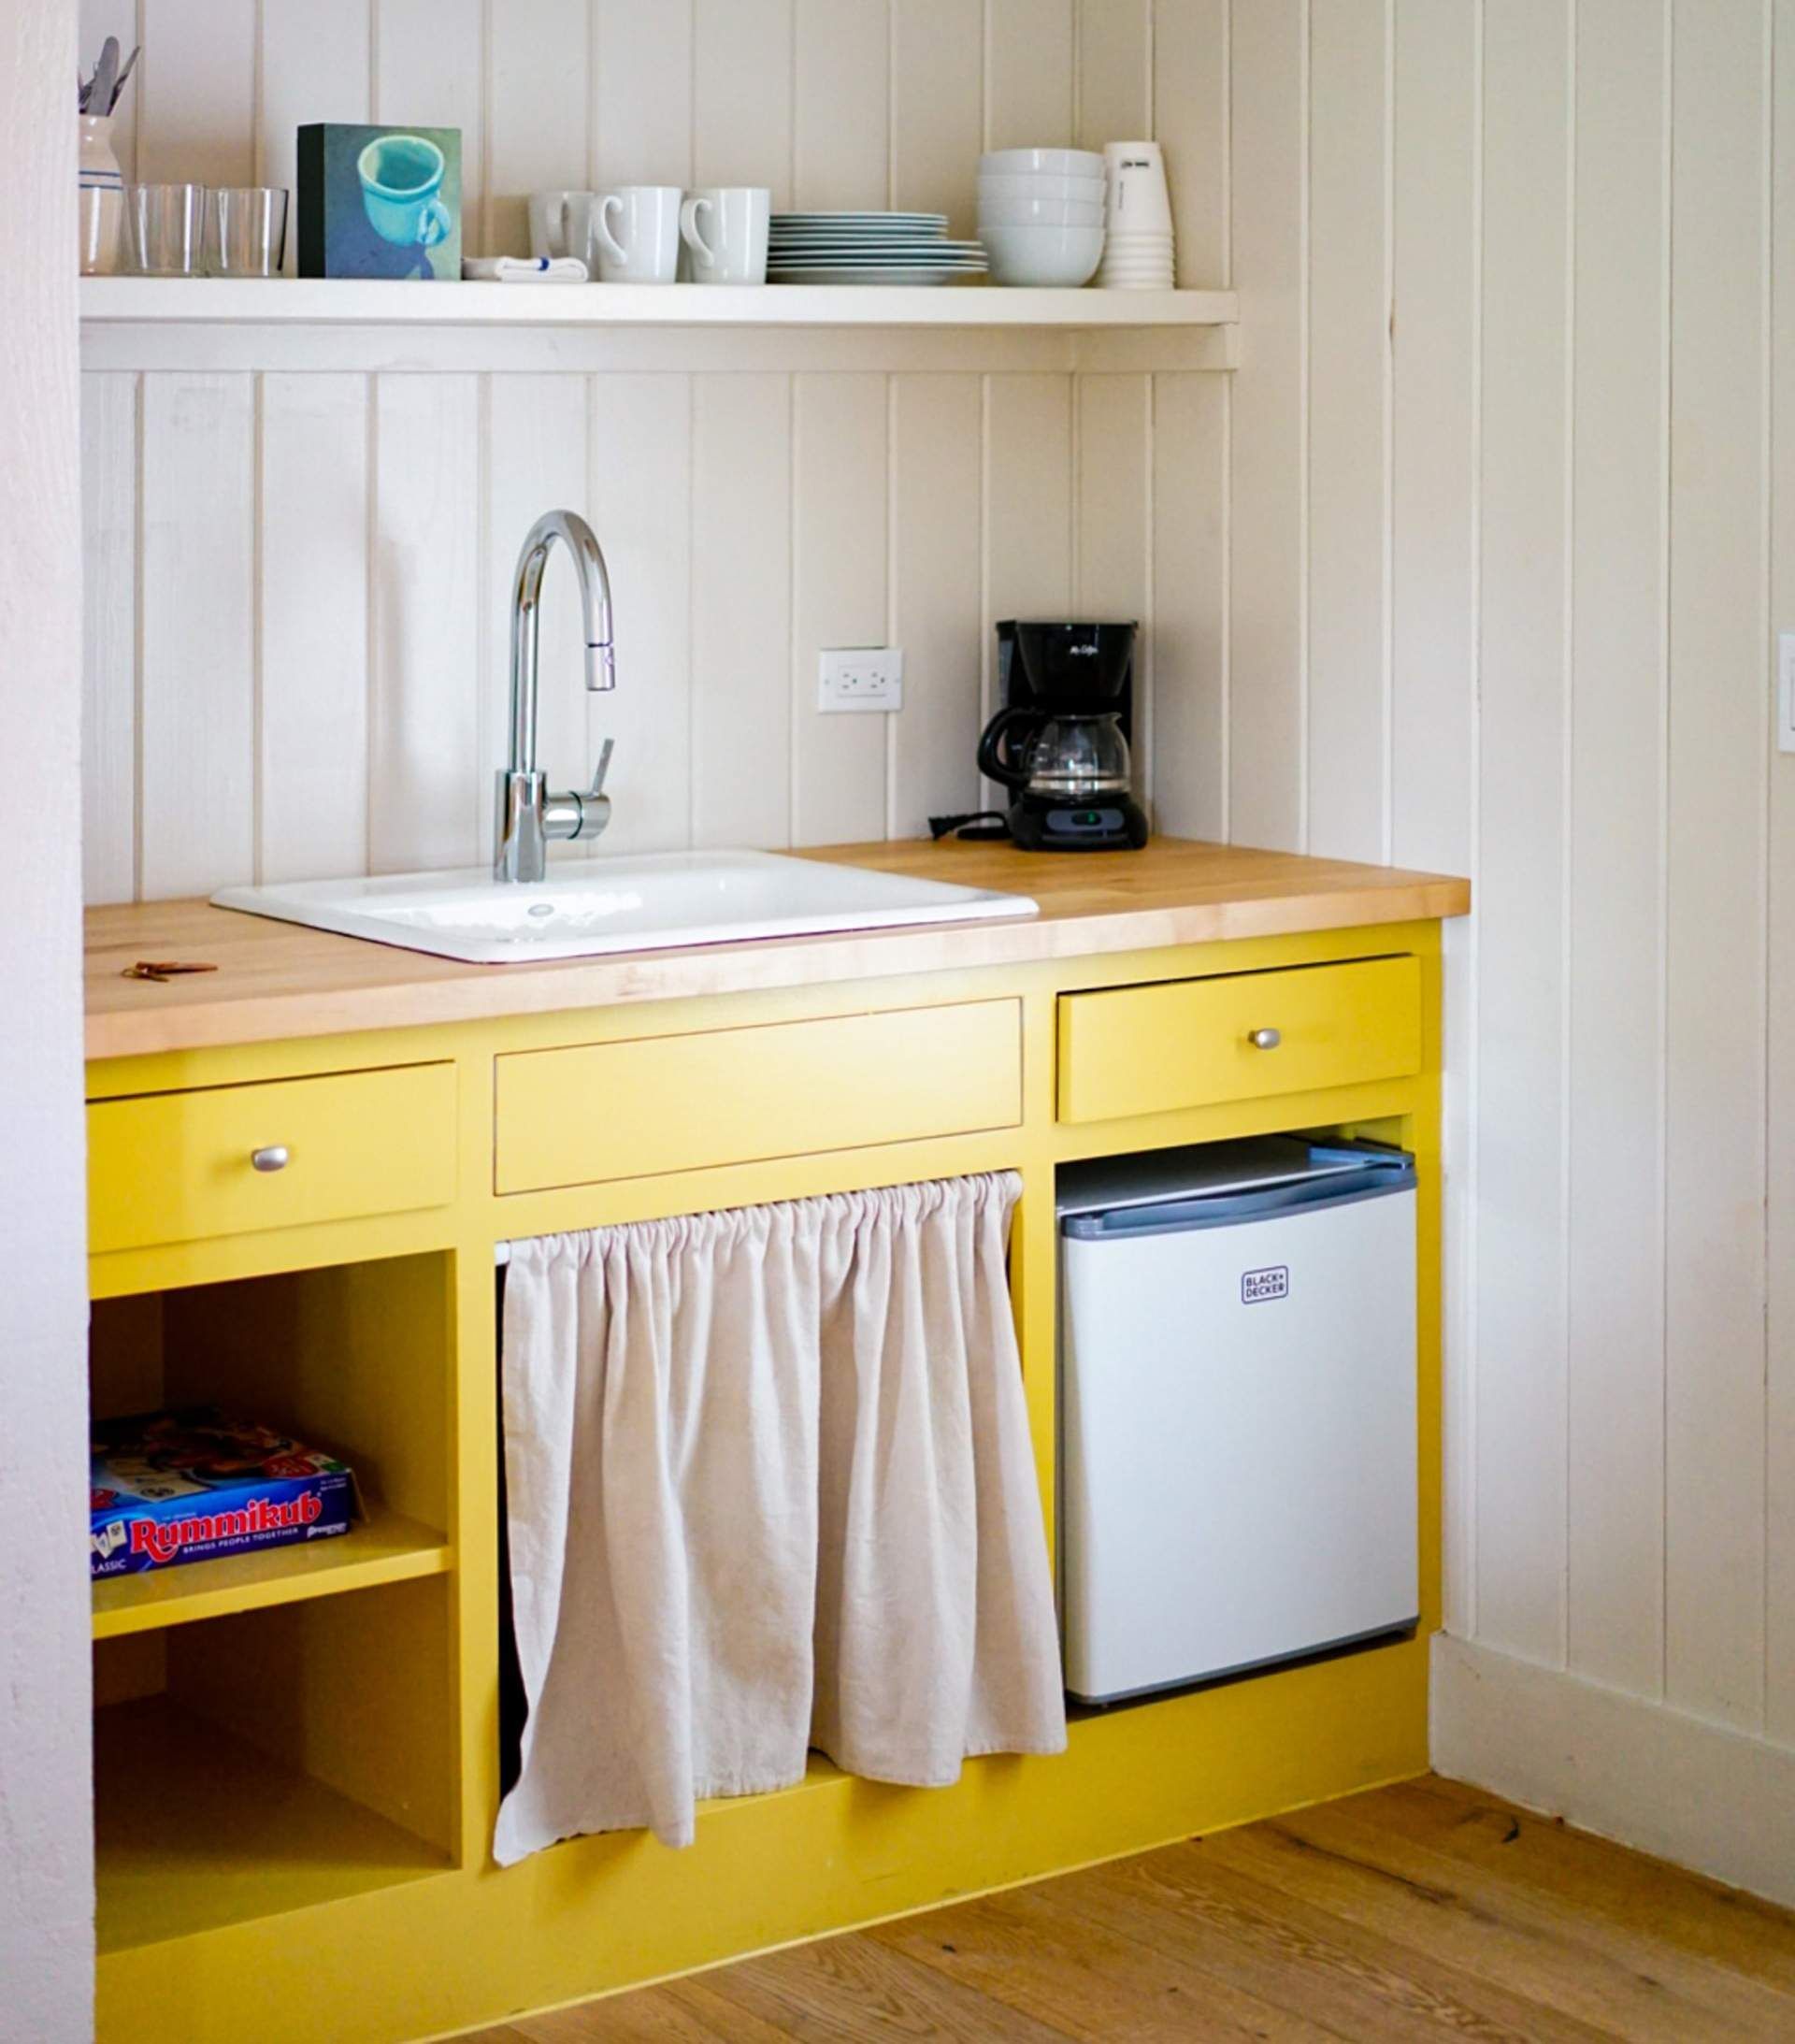 a kitchen with yellow cabinets and a black and decker refrigerator